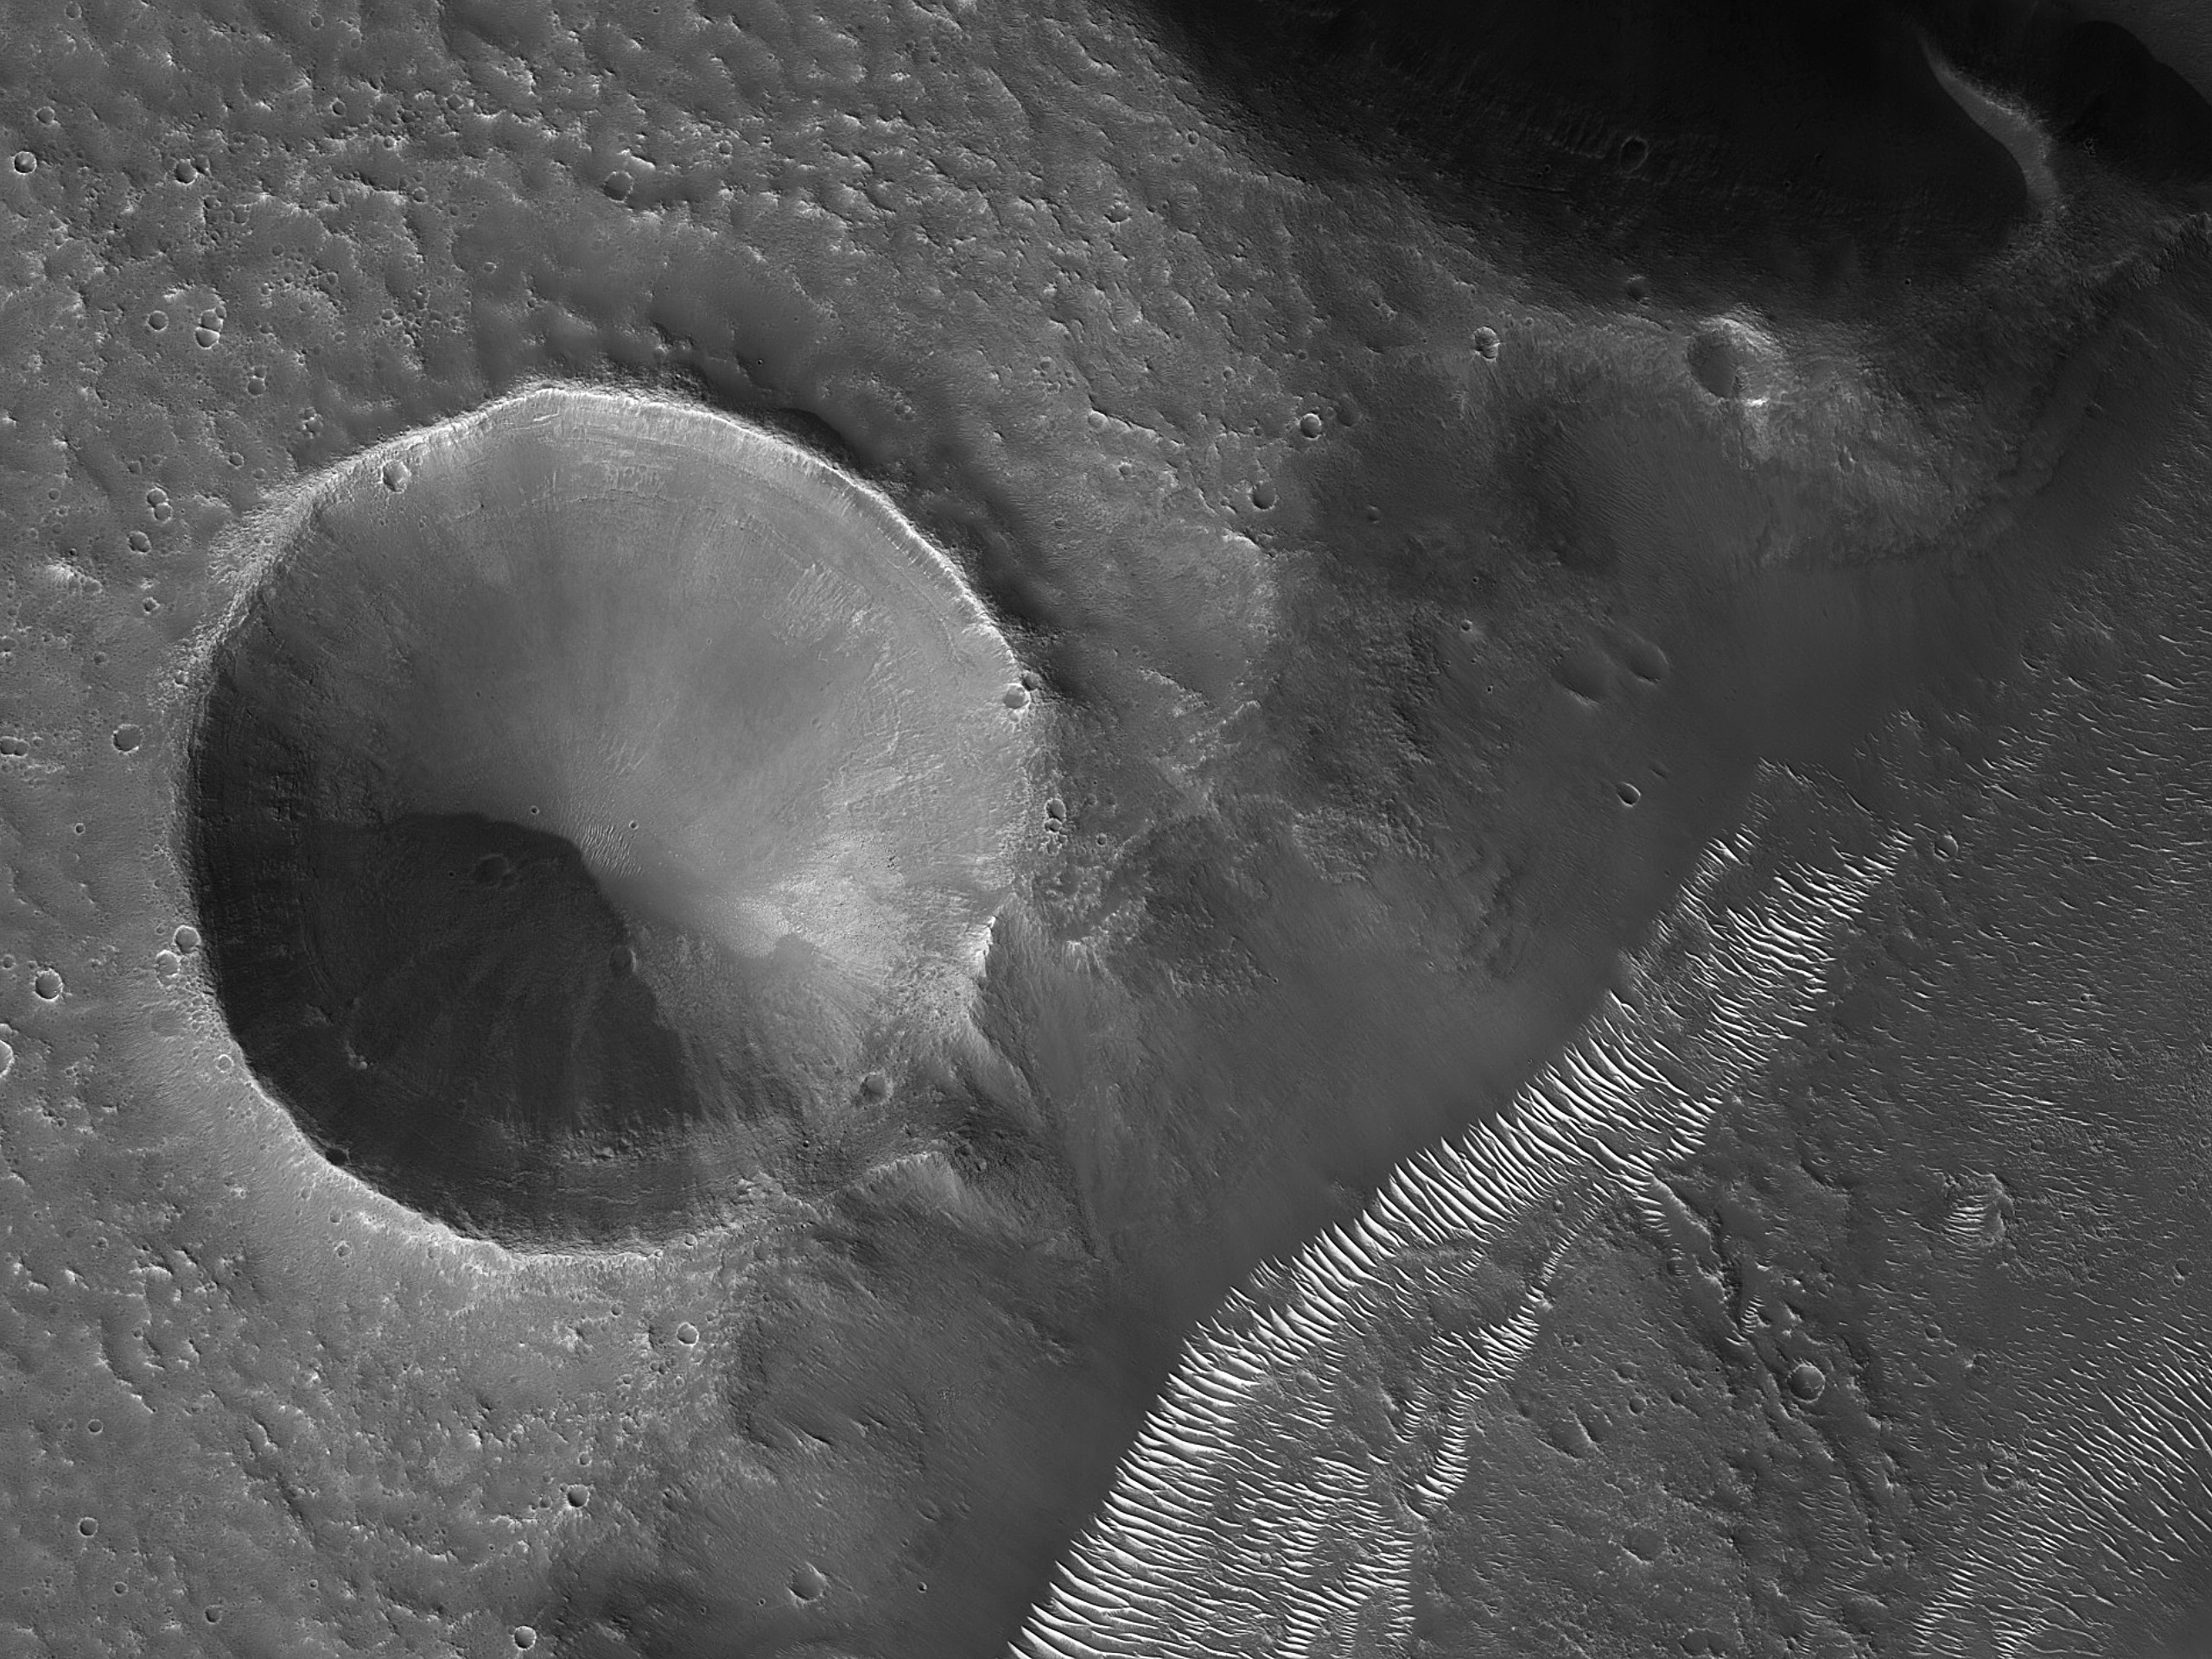 Layers in Crater in Cydonia Mensae